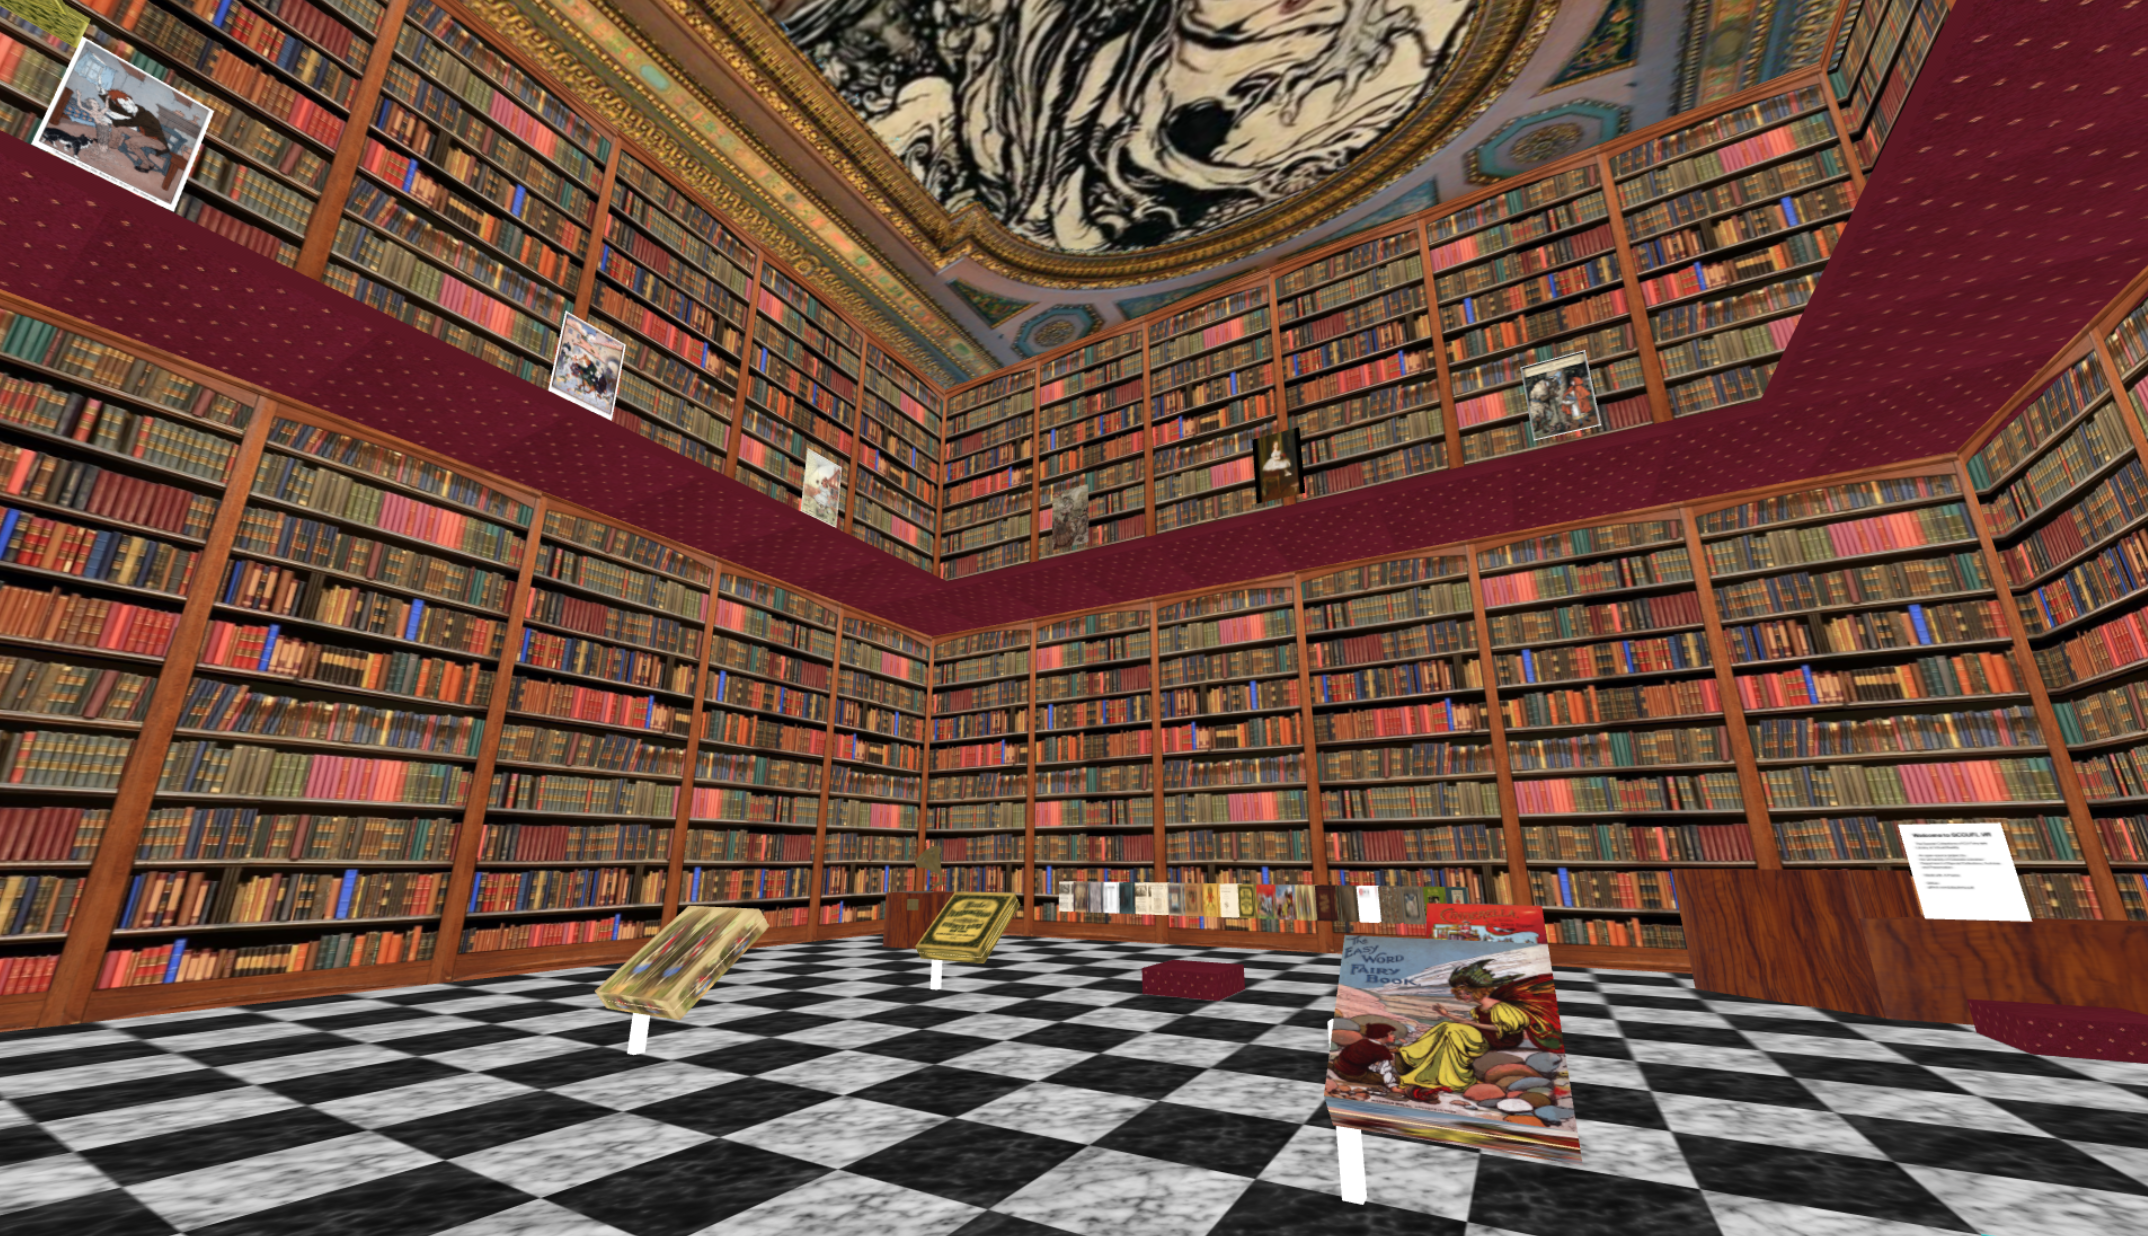 Fairy tale books in a VR library